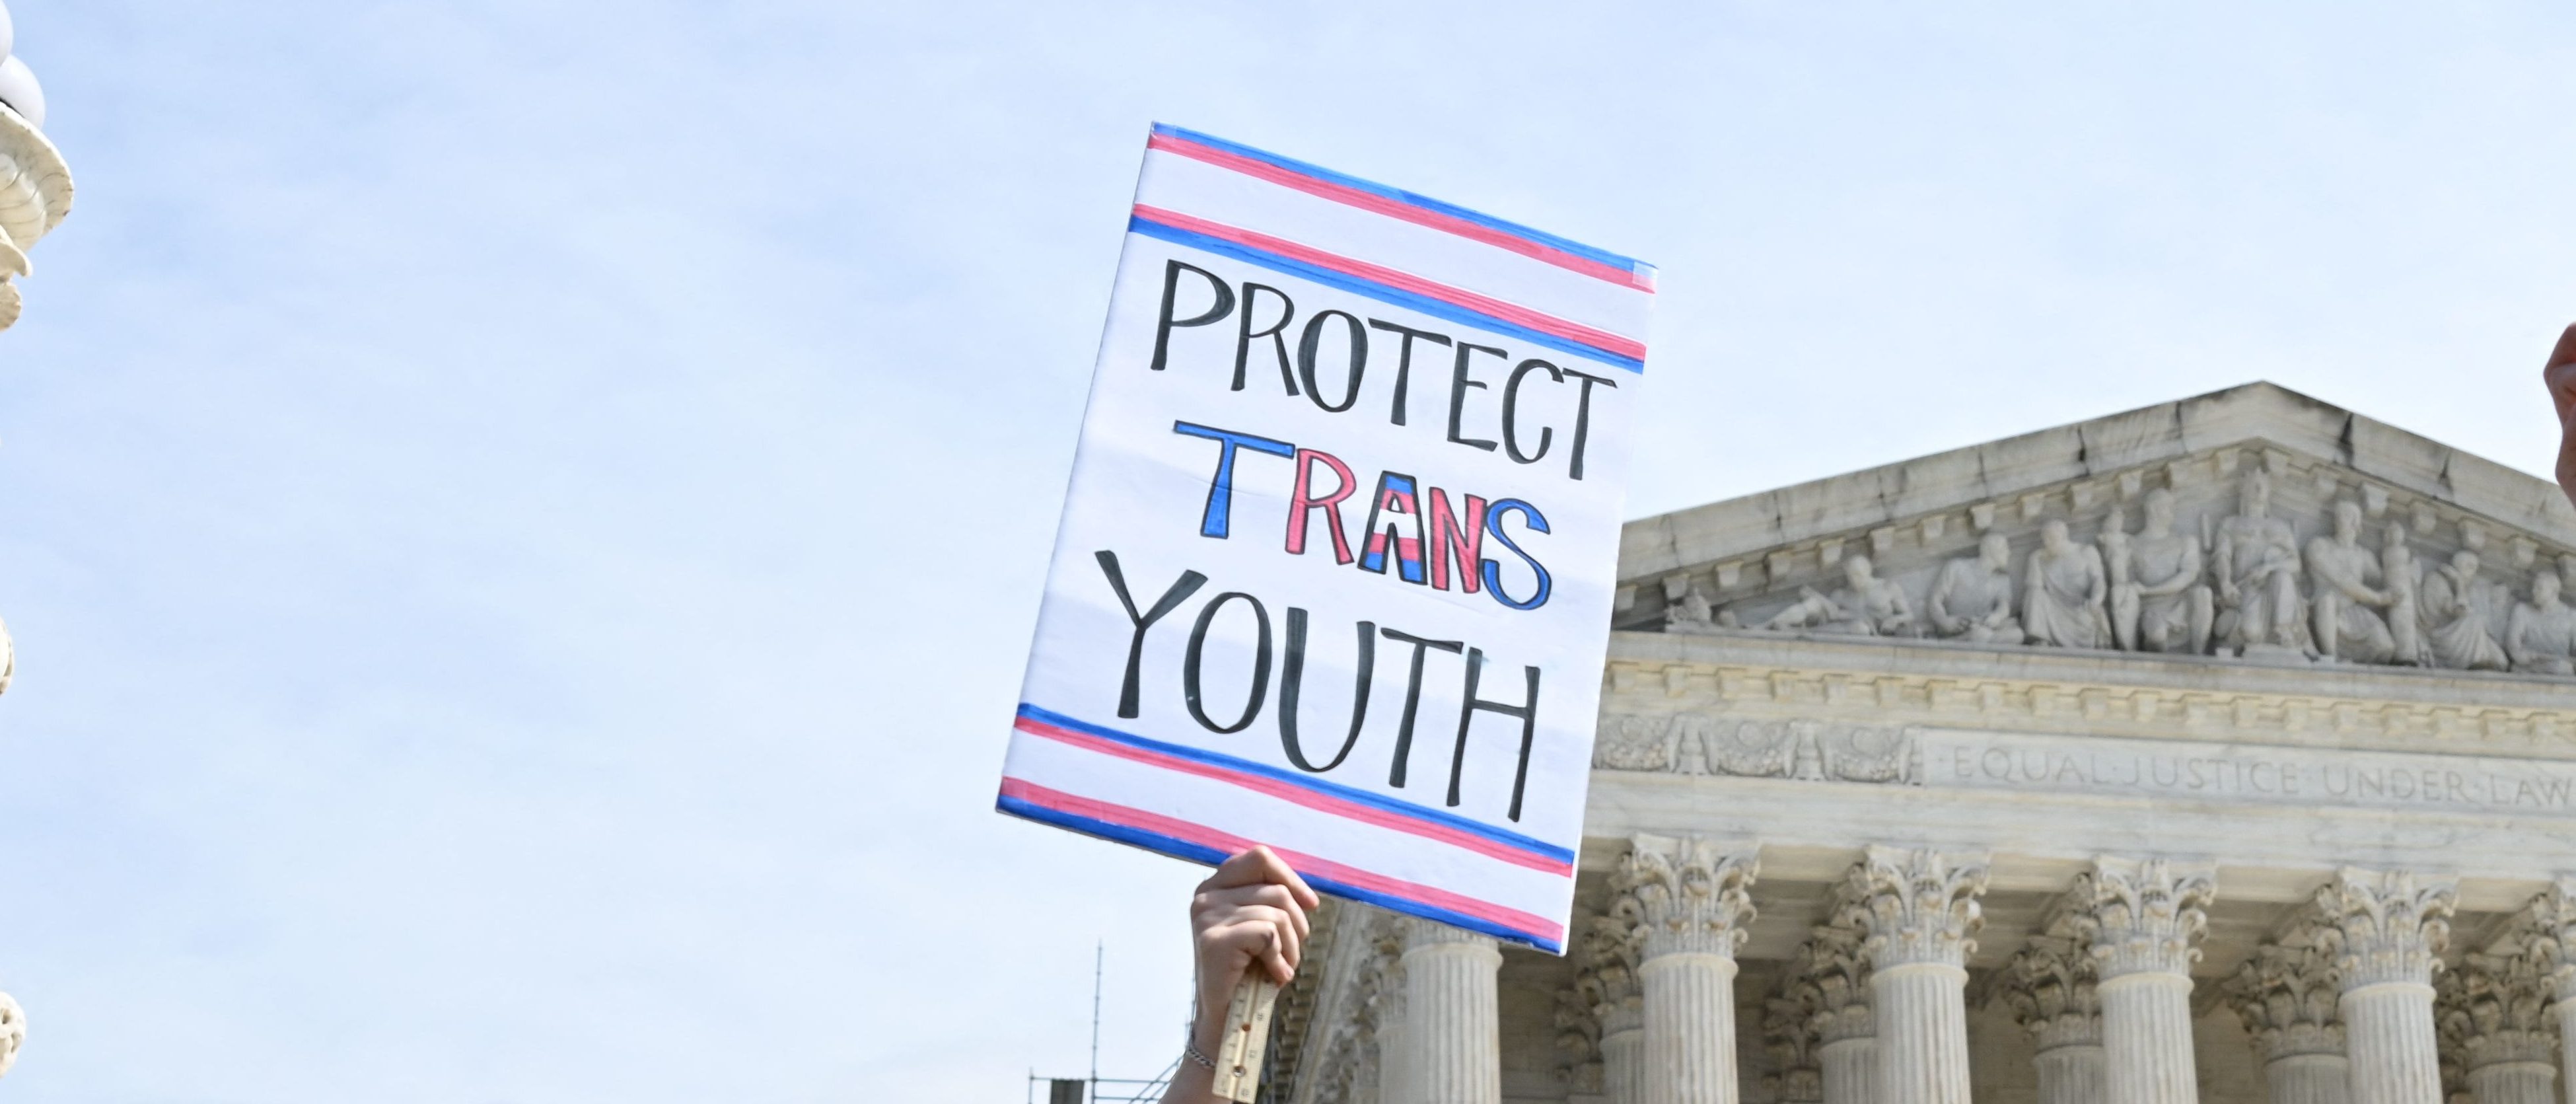 Activists for transgender rights gather in front of the US Supreme Court in Washington, DC, on April 1, 2023. (Photo by ANDREW CABALLERO-REYNOLDS / AFP) (Photo by ANDREW CABALLERO-REYNOLDS/AFP via Getty Images)